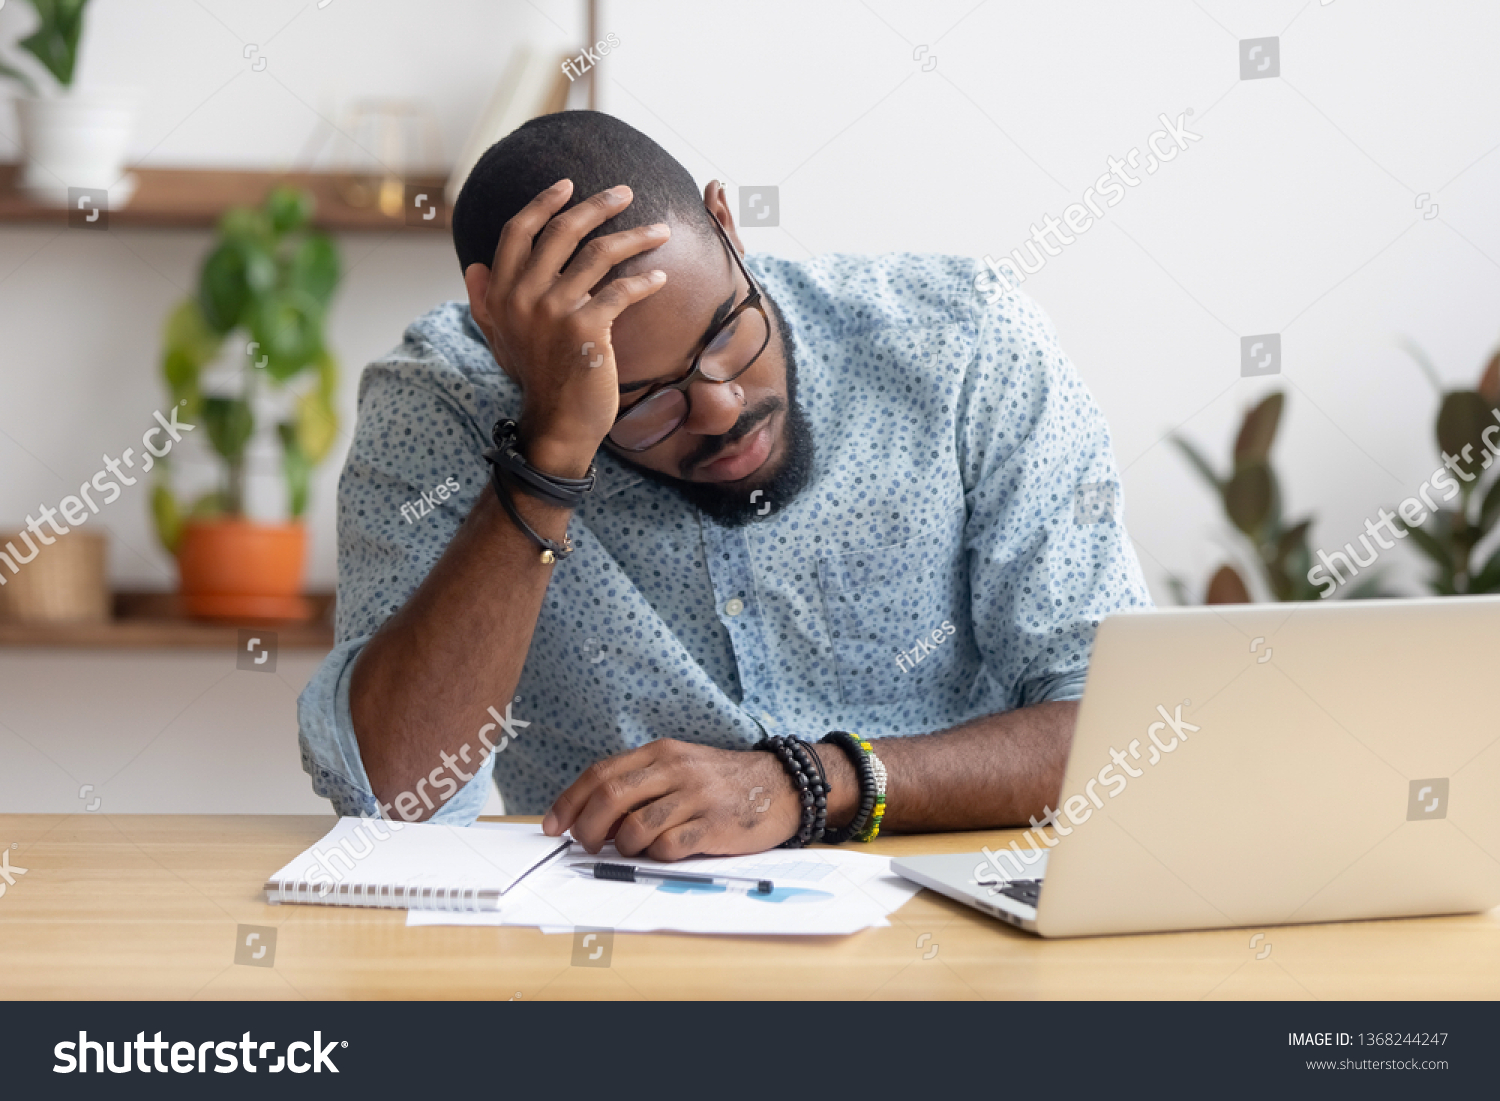 Tired depressed bored african businessman frustrated by business failure bankruptcy looking at laptop feel exhausted having headache, upset stressed black office worker worried about problem at work #1368244247